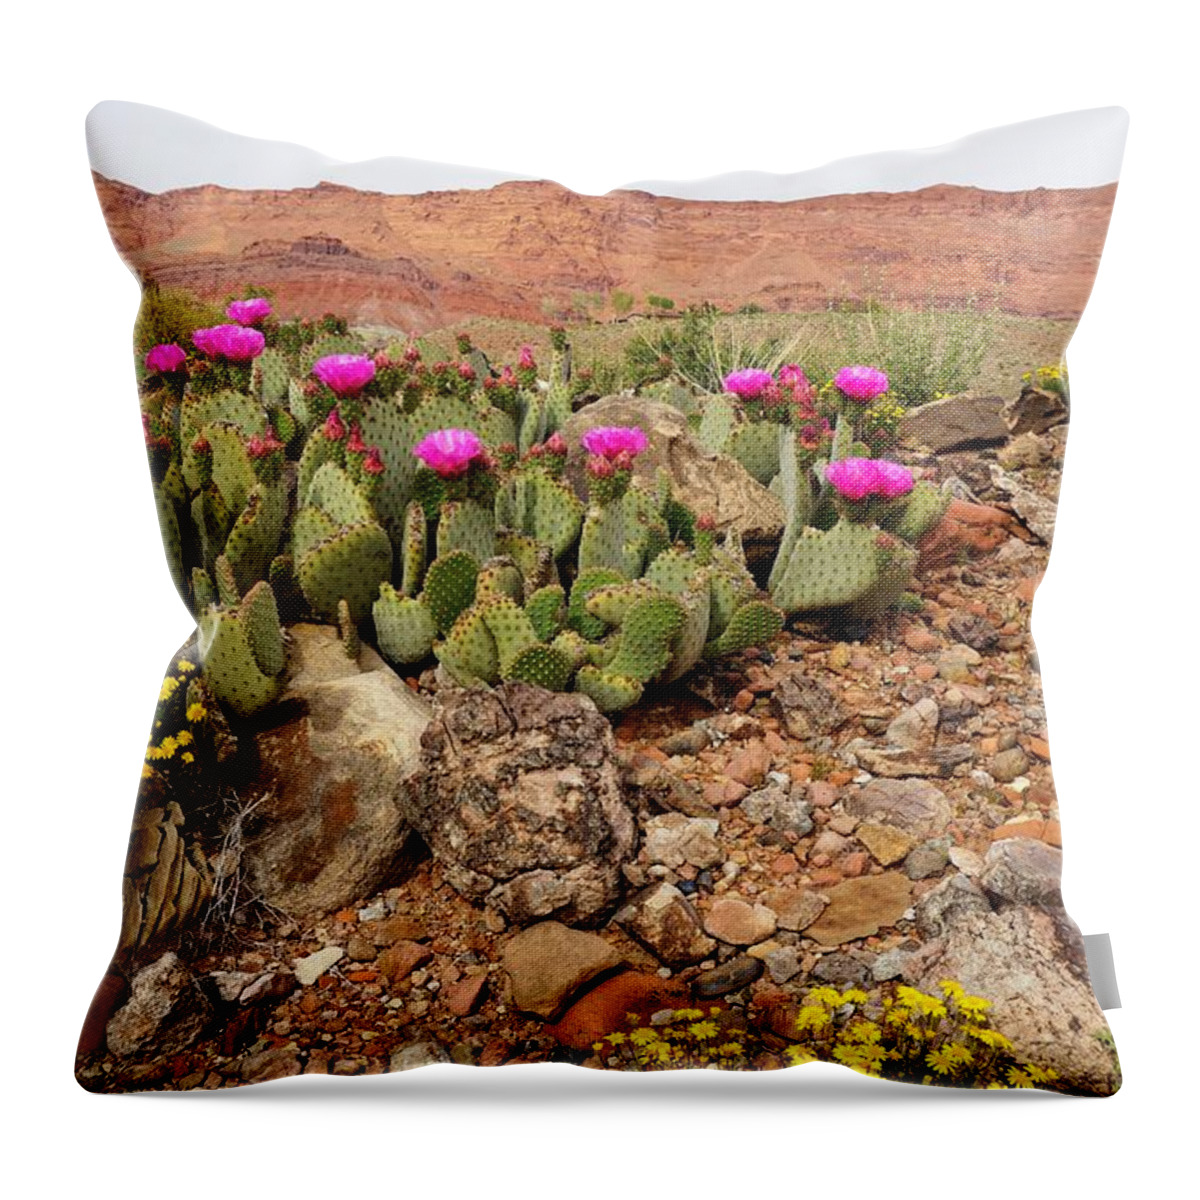 Vermillion Throw Pillow featuring the photograph Desert Cactus in Bloom by Tranquil Light Photography